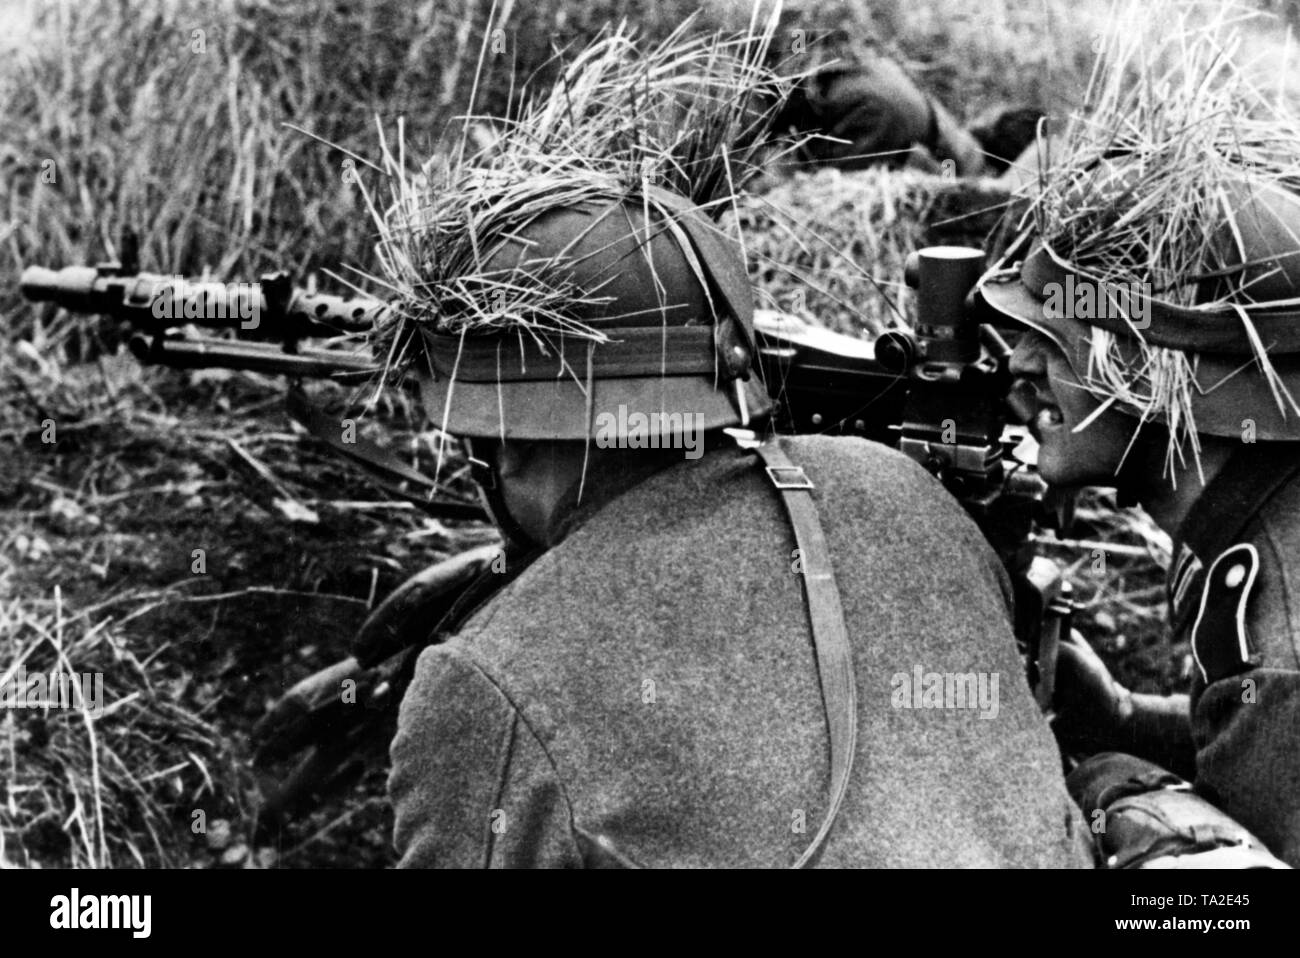 German soldiers with machine guns in the Second World War Stock Photo